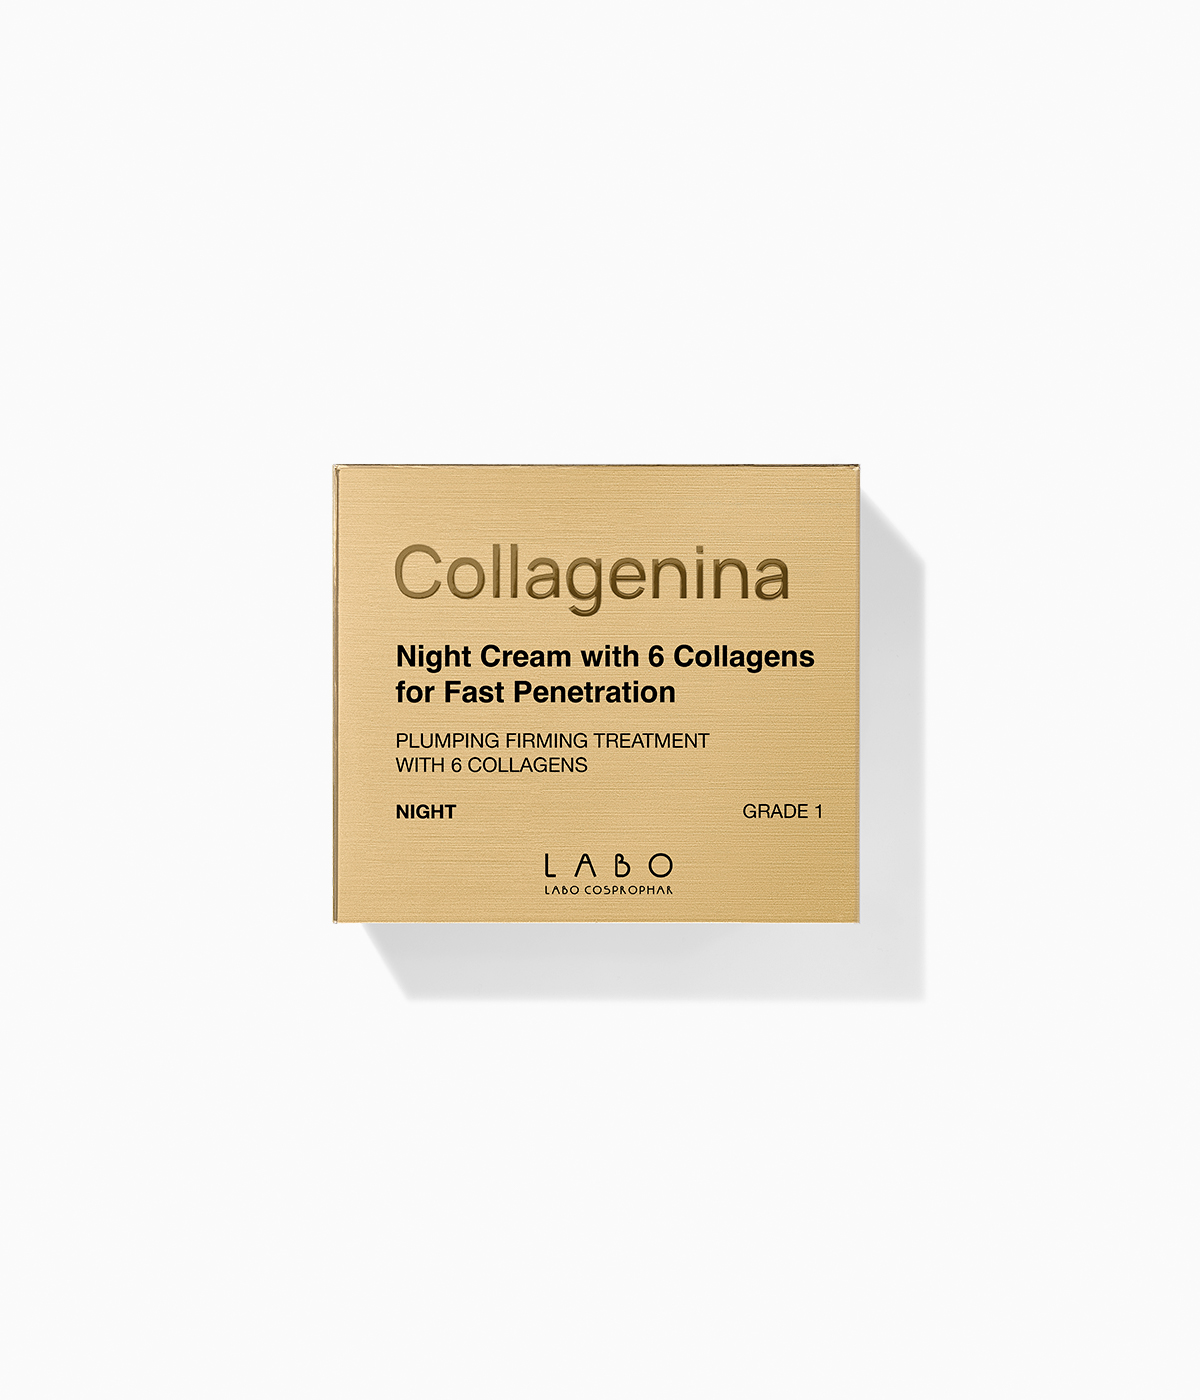 Collagenina Night Cream with 6 Collagens for Fast Penetration